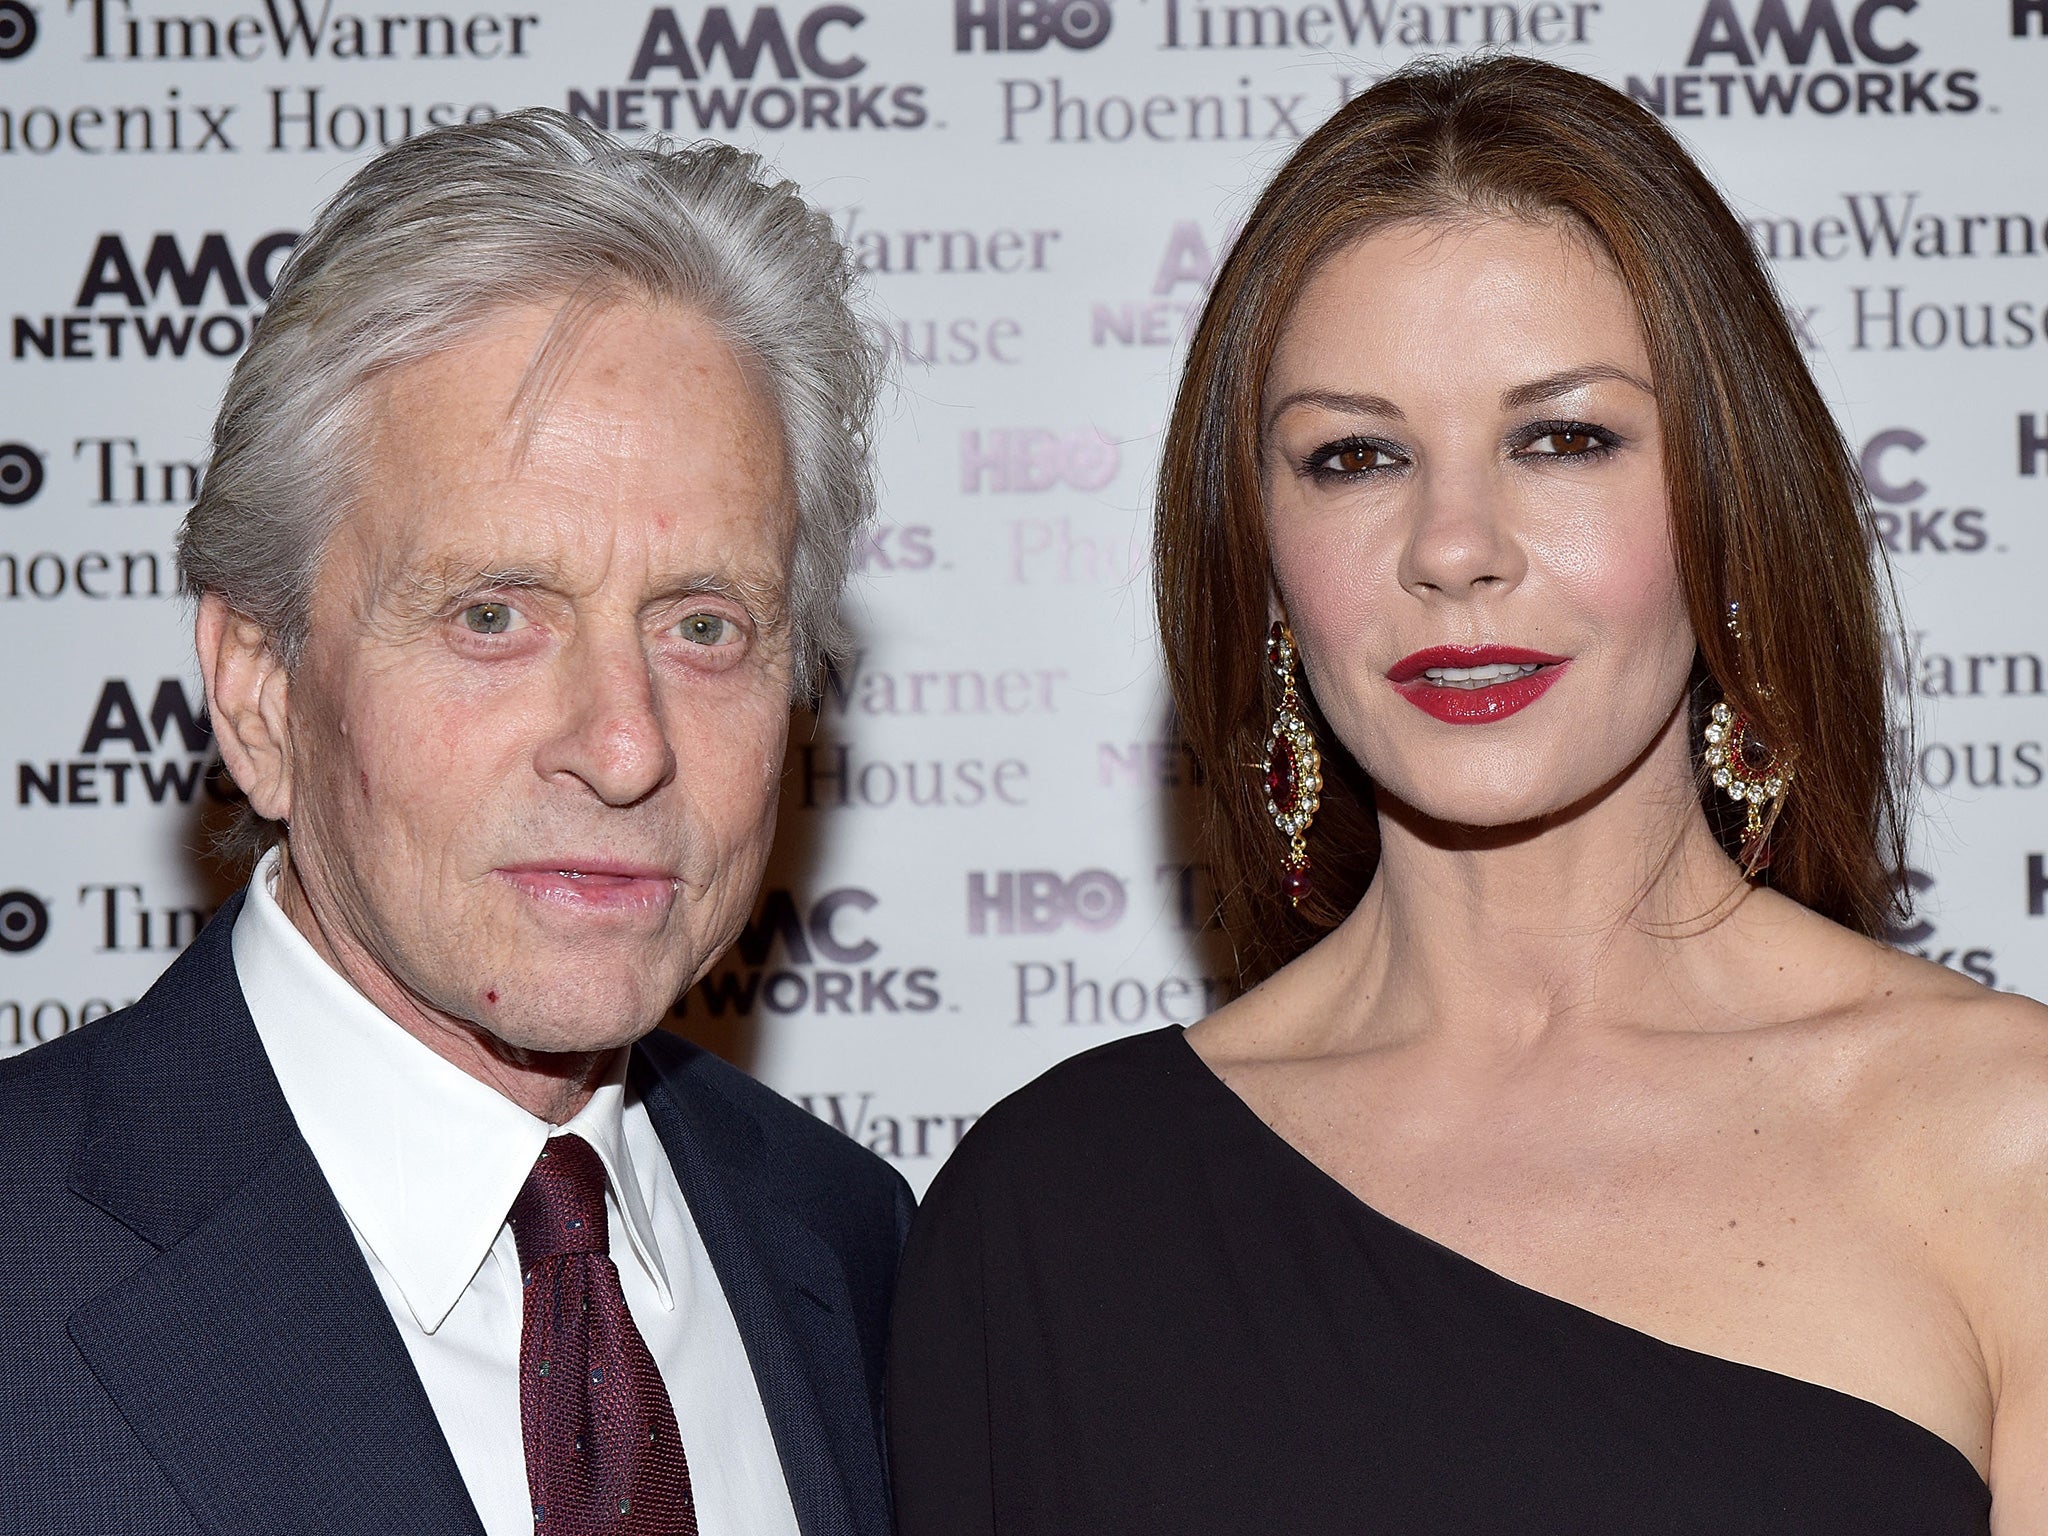 Ant-Man Michael Douglas wants wife Catherine Zeta Jones to play Marvel superhero Wasp in future film The Independent The Independent pic